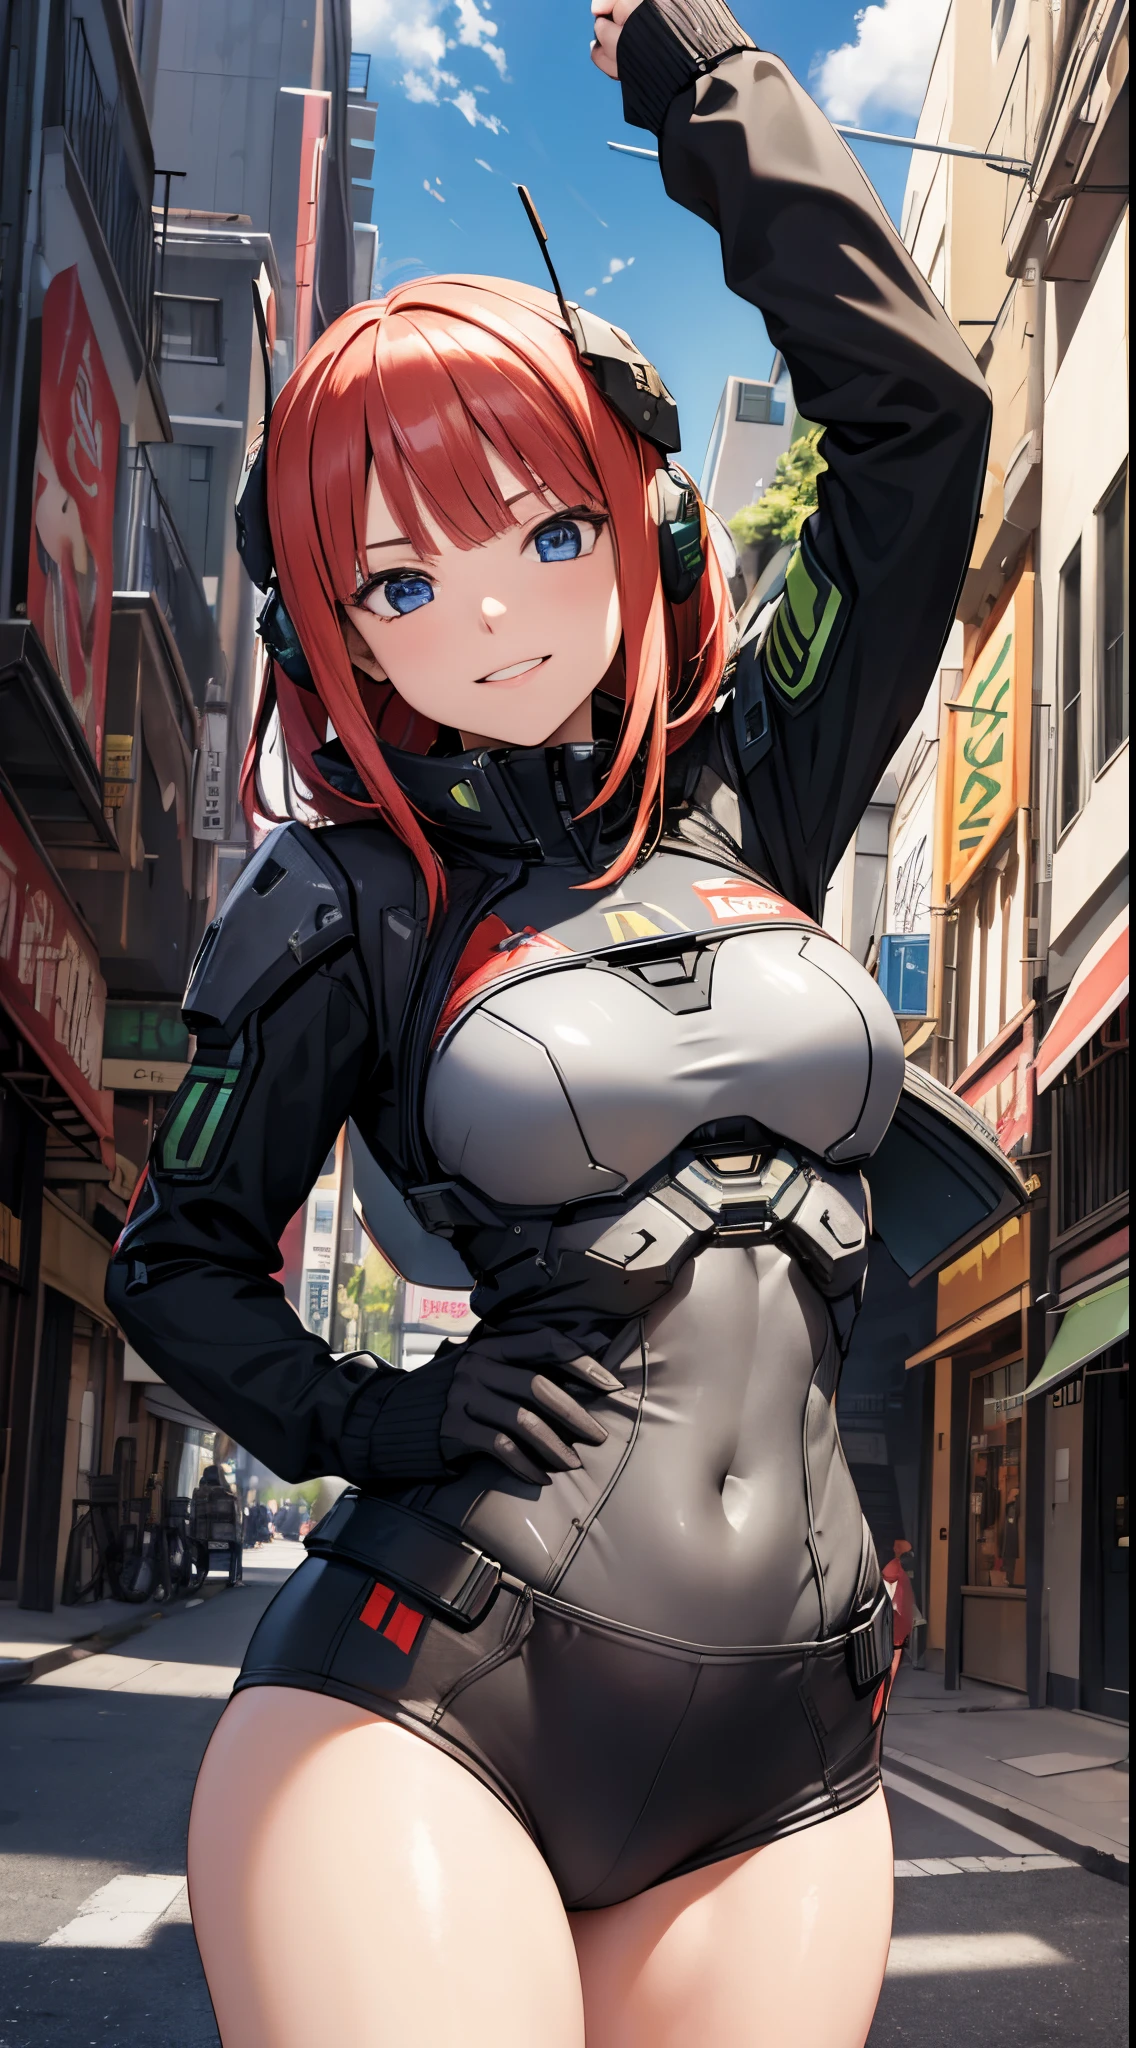 Nino Nakano laughing,detailed hands,pose sexy,infinite halo armor,destroyed city